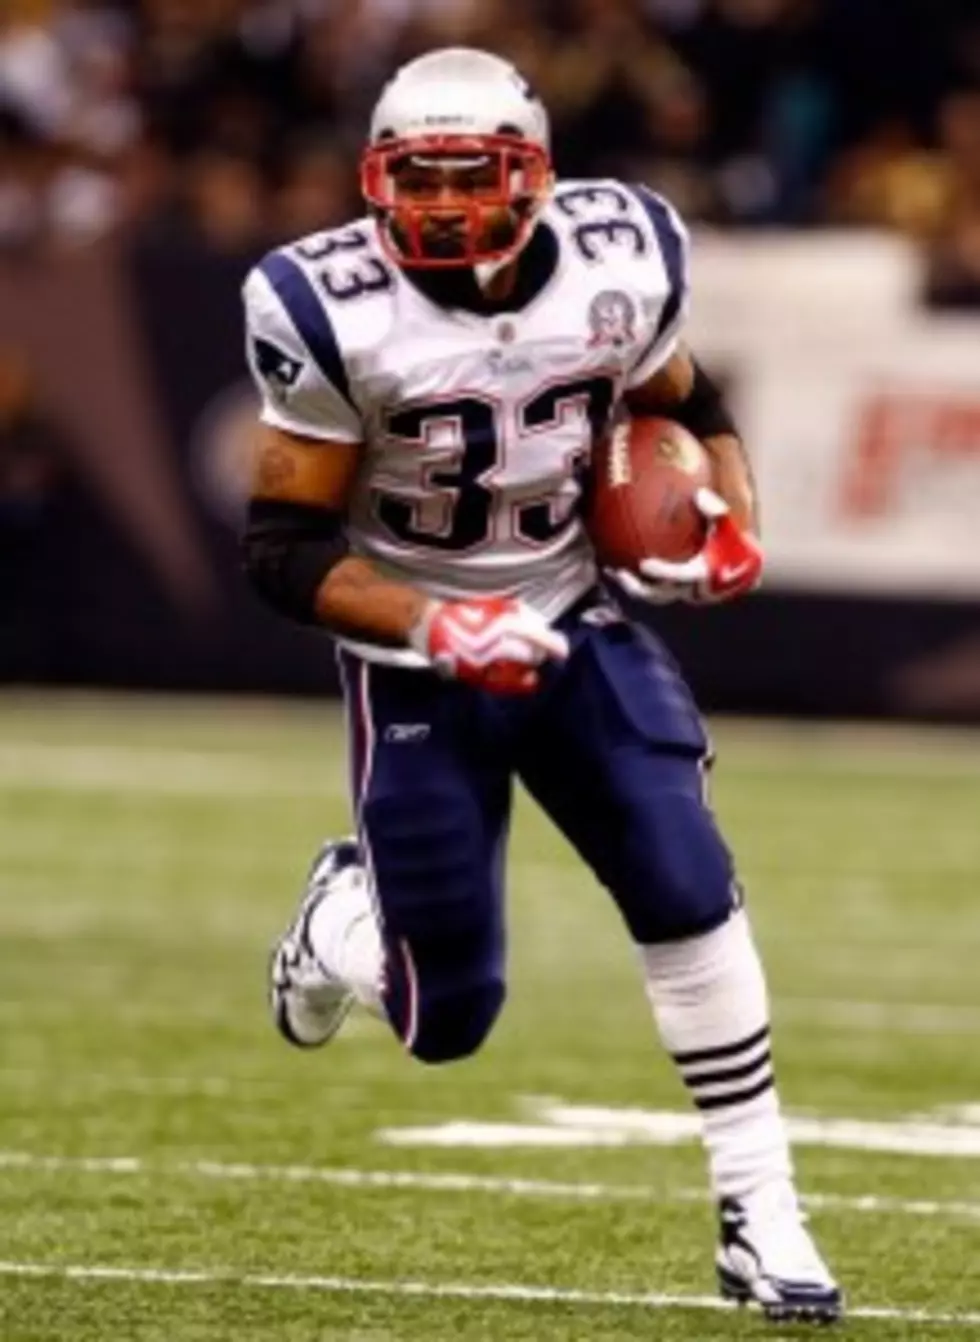 Kevin Faulk To Announce Retirement From NFL